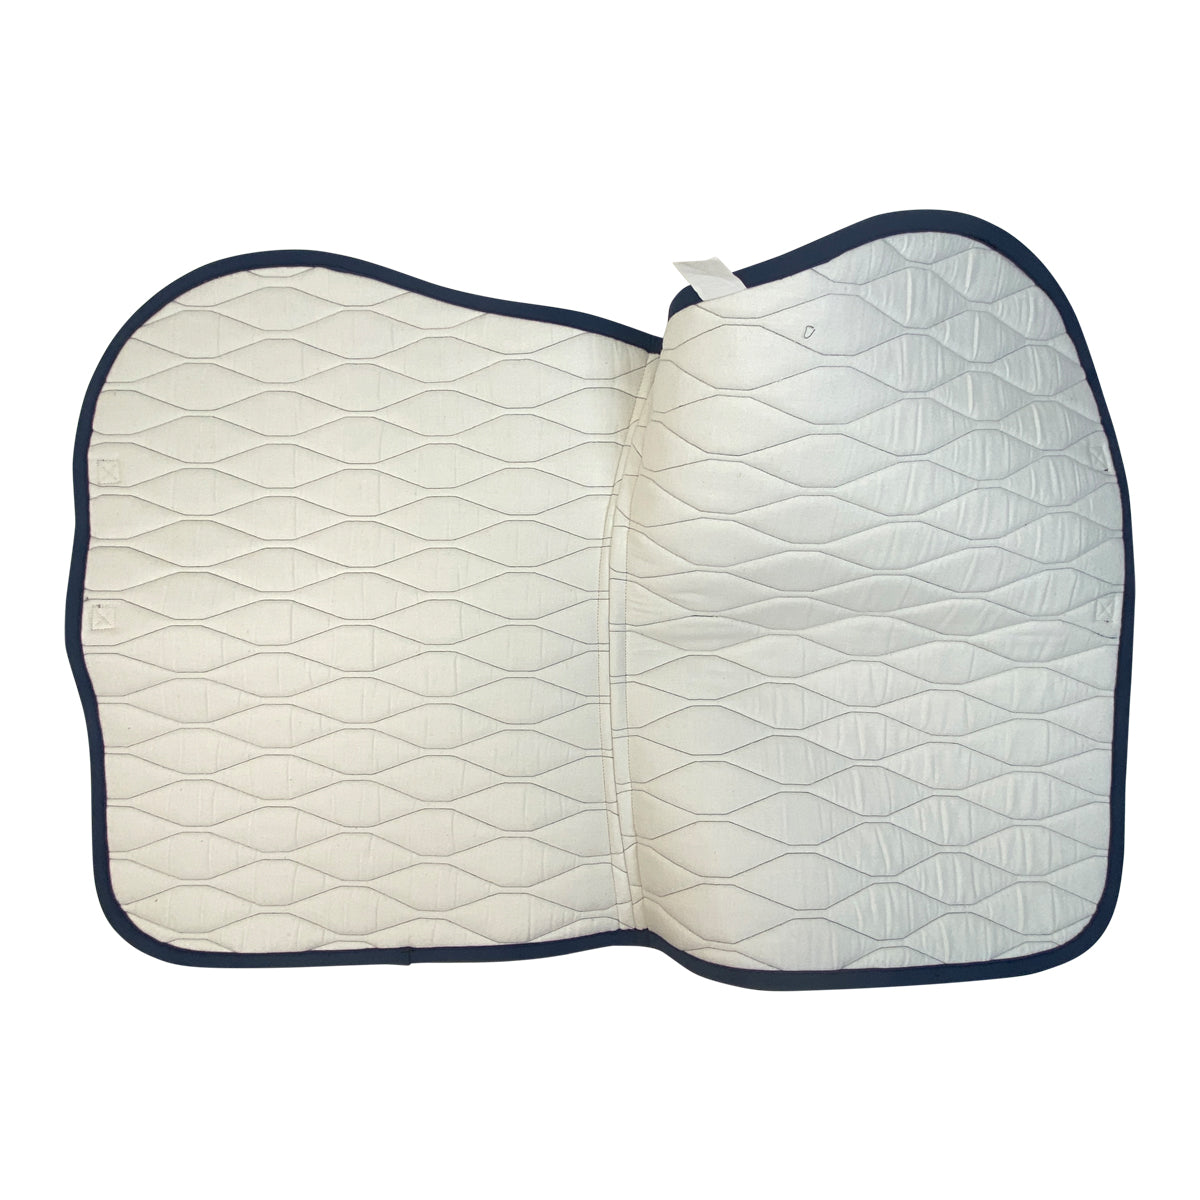 Equiline Microstud Logo Tech Saddle Pad in Diplomatic Blue